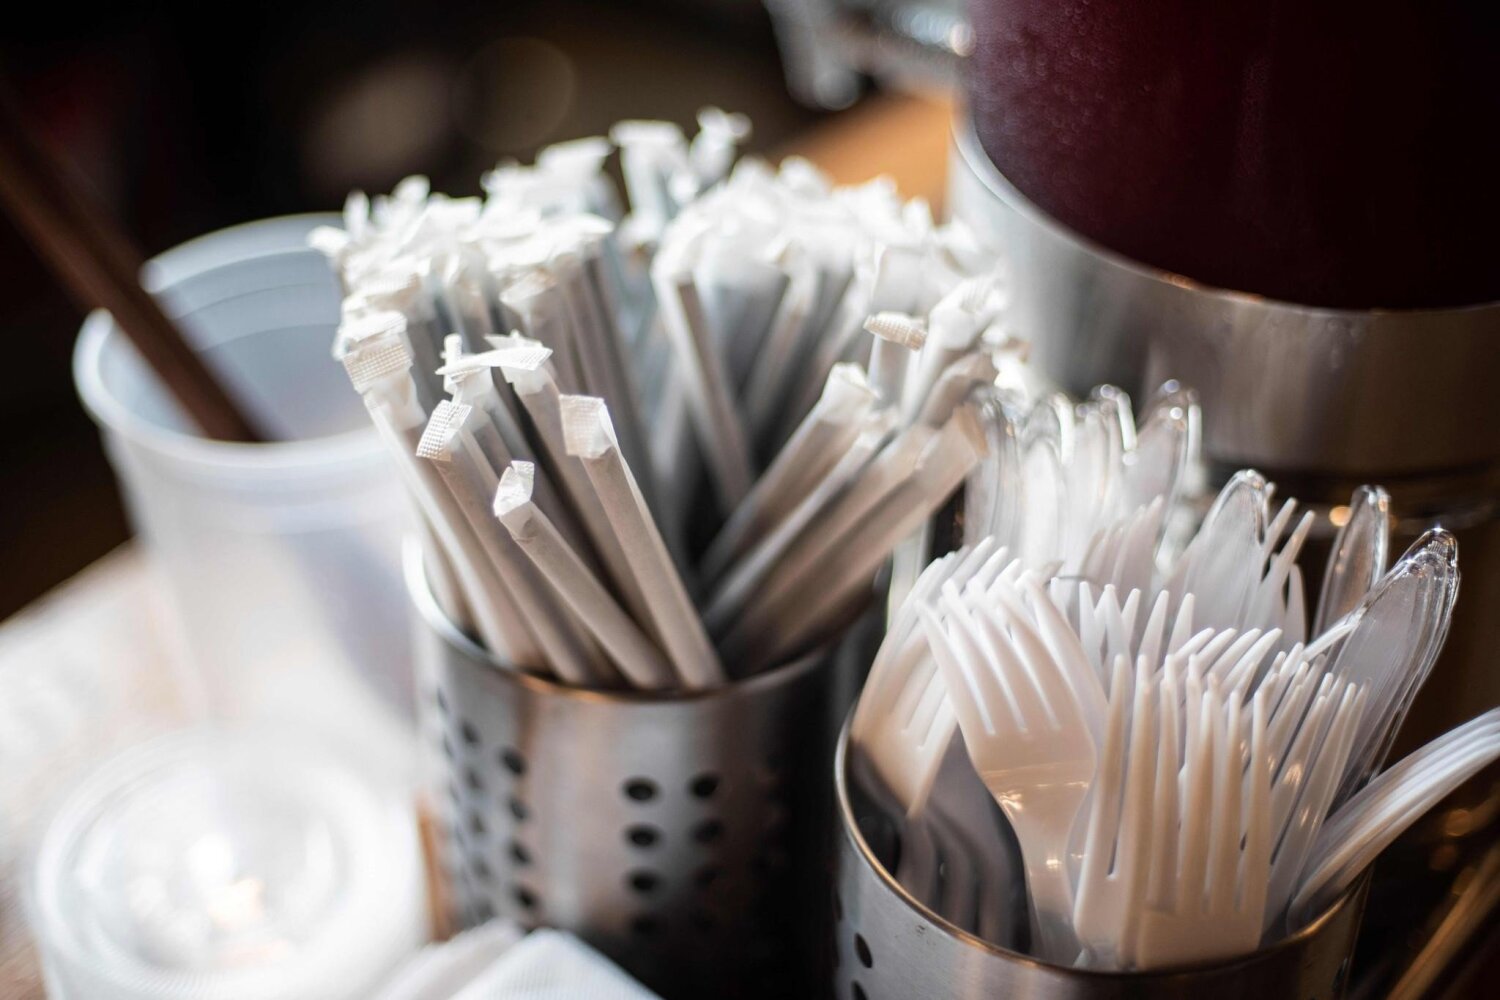 Getting takeout? You have to ask for plastic utensils and napkins in L.A. now